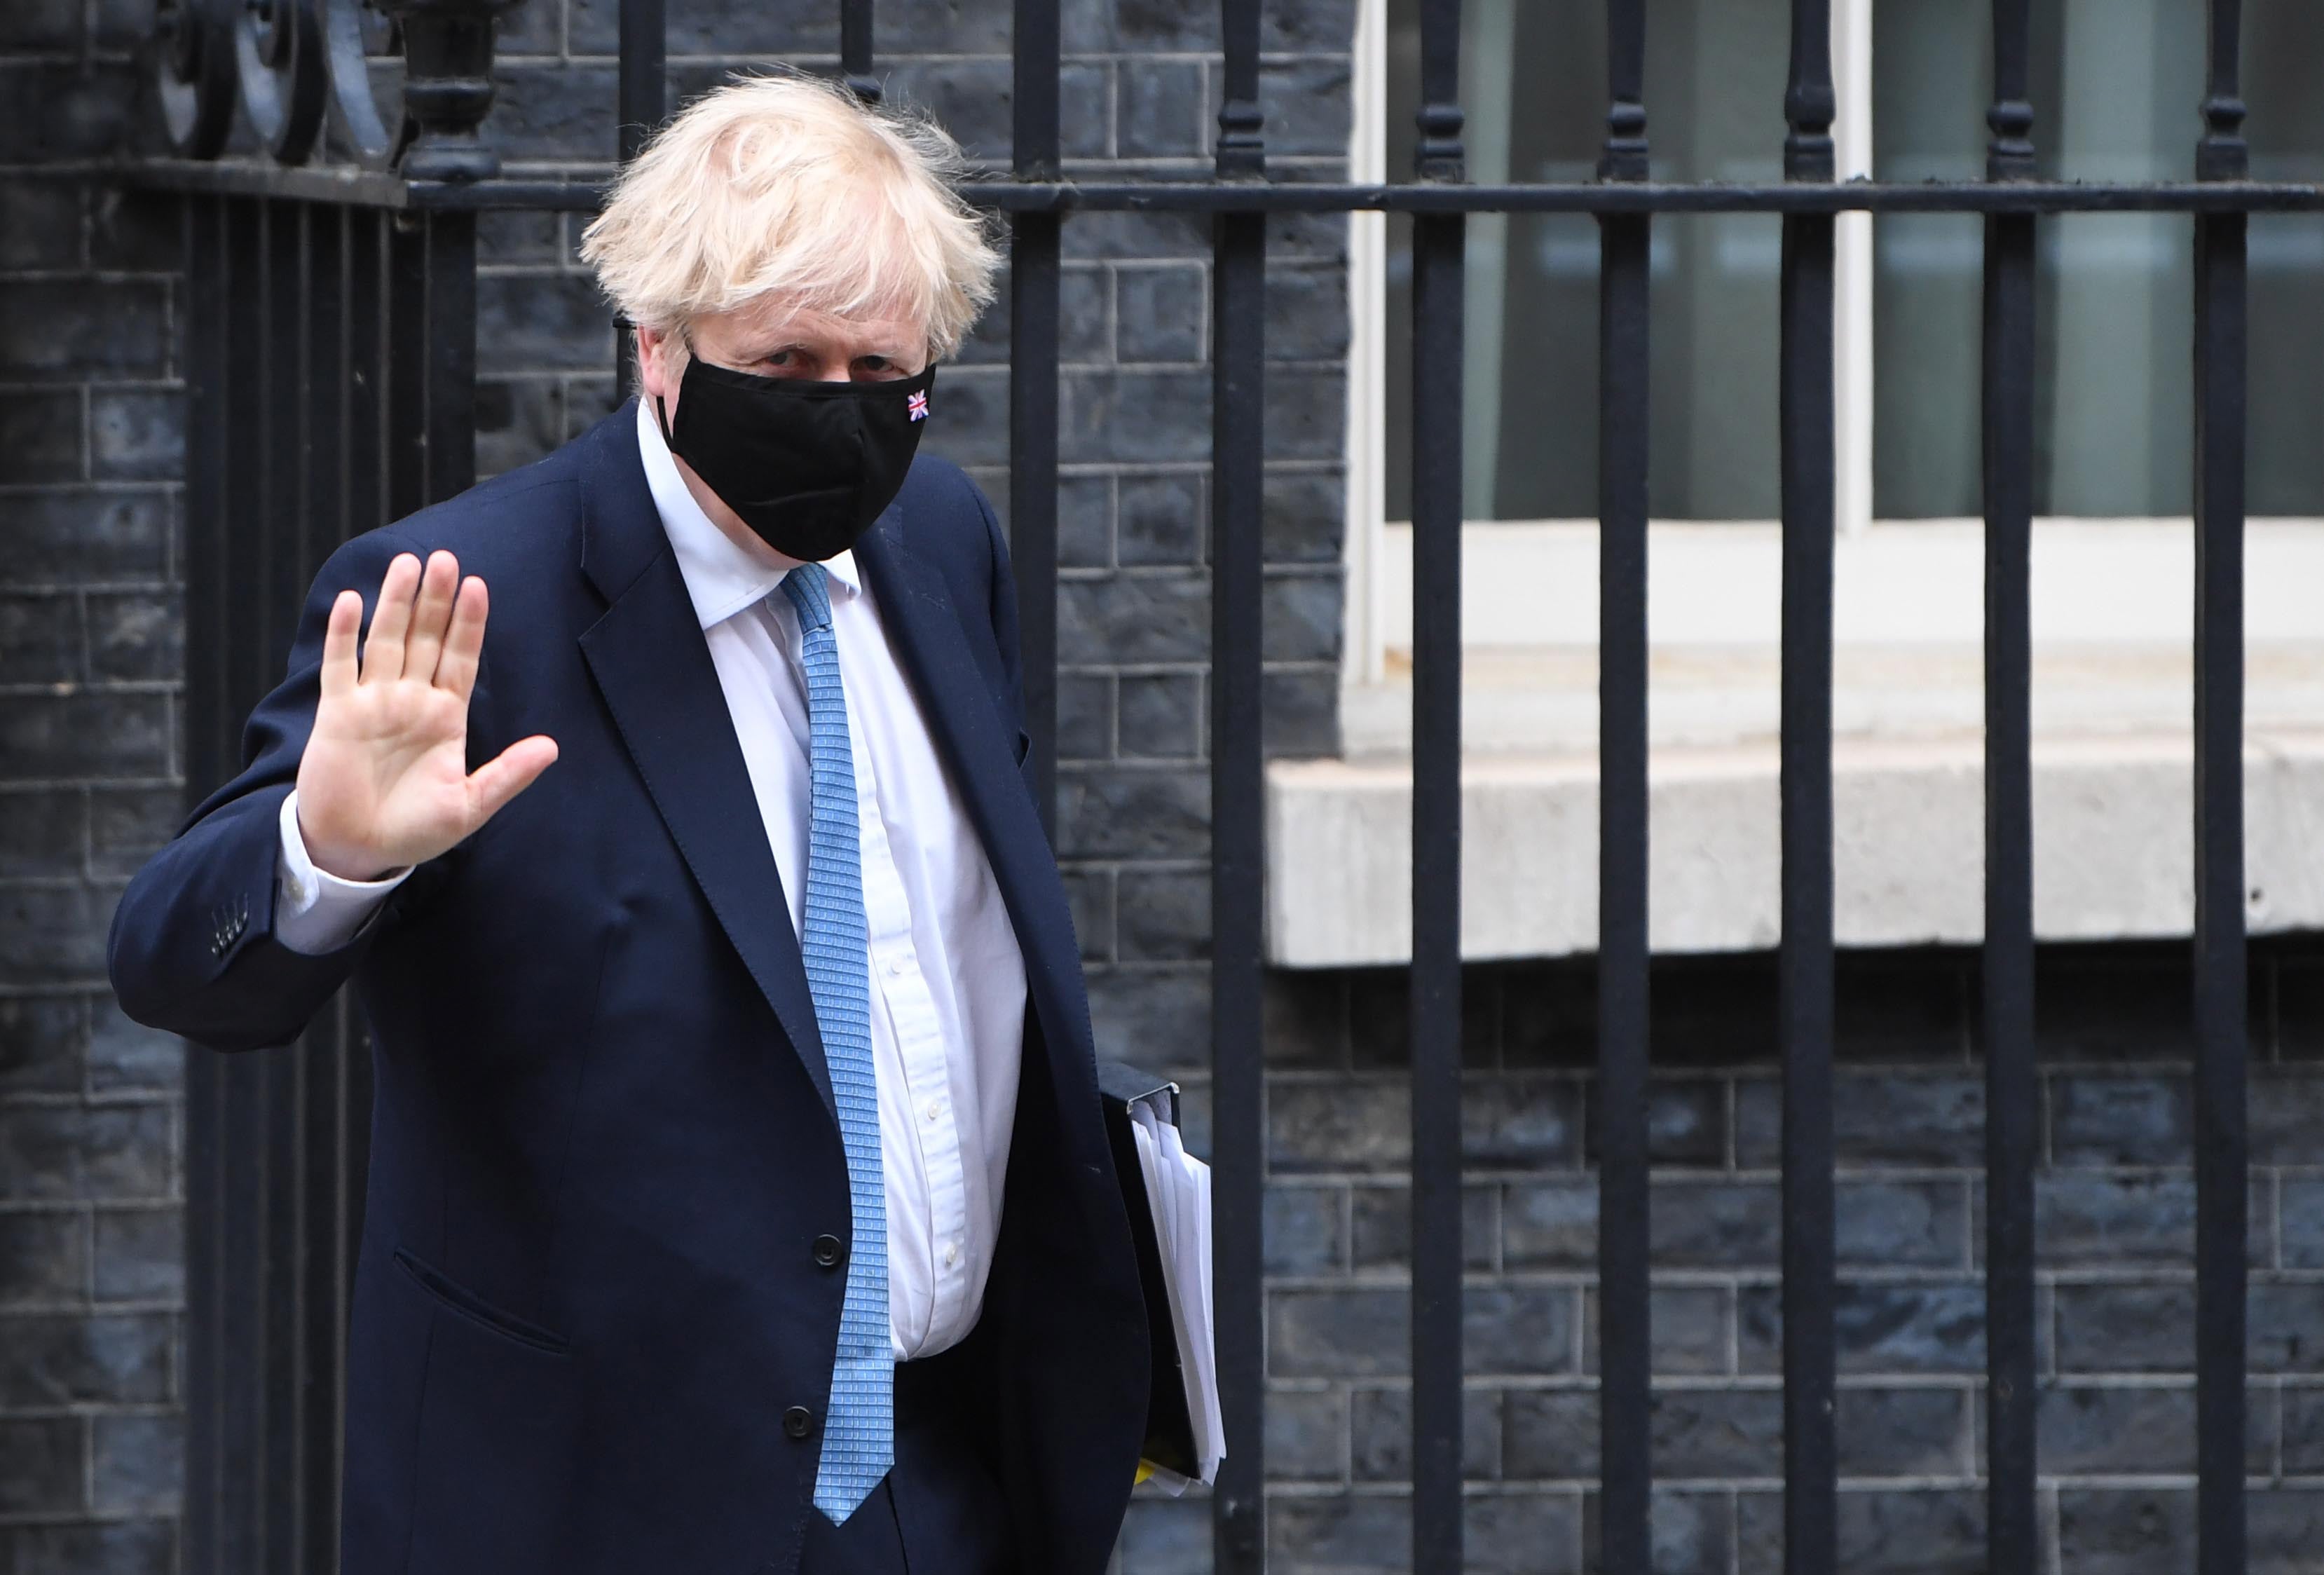 Boris Johnson may have agreed the protocol and hoped to sort out the problems later